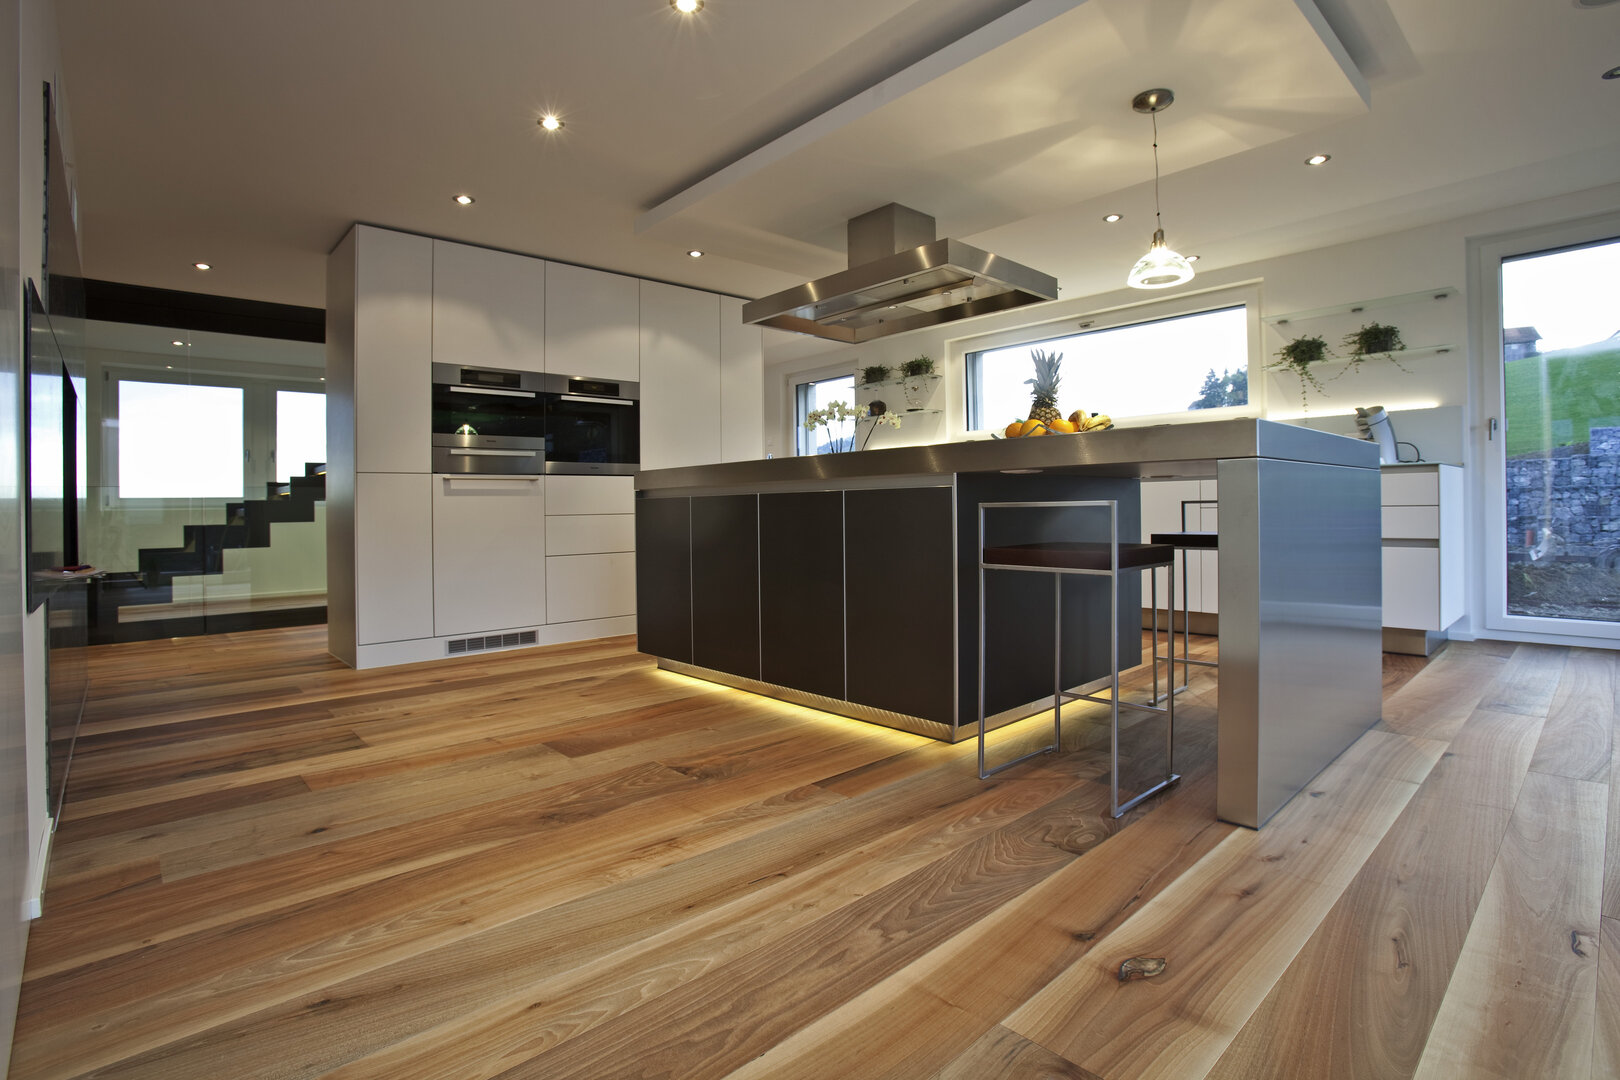 TRAPA Plank floor 
Walnut eur. knotty brushed natural